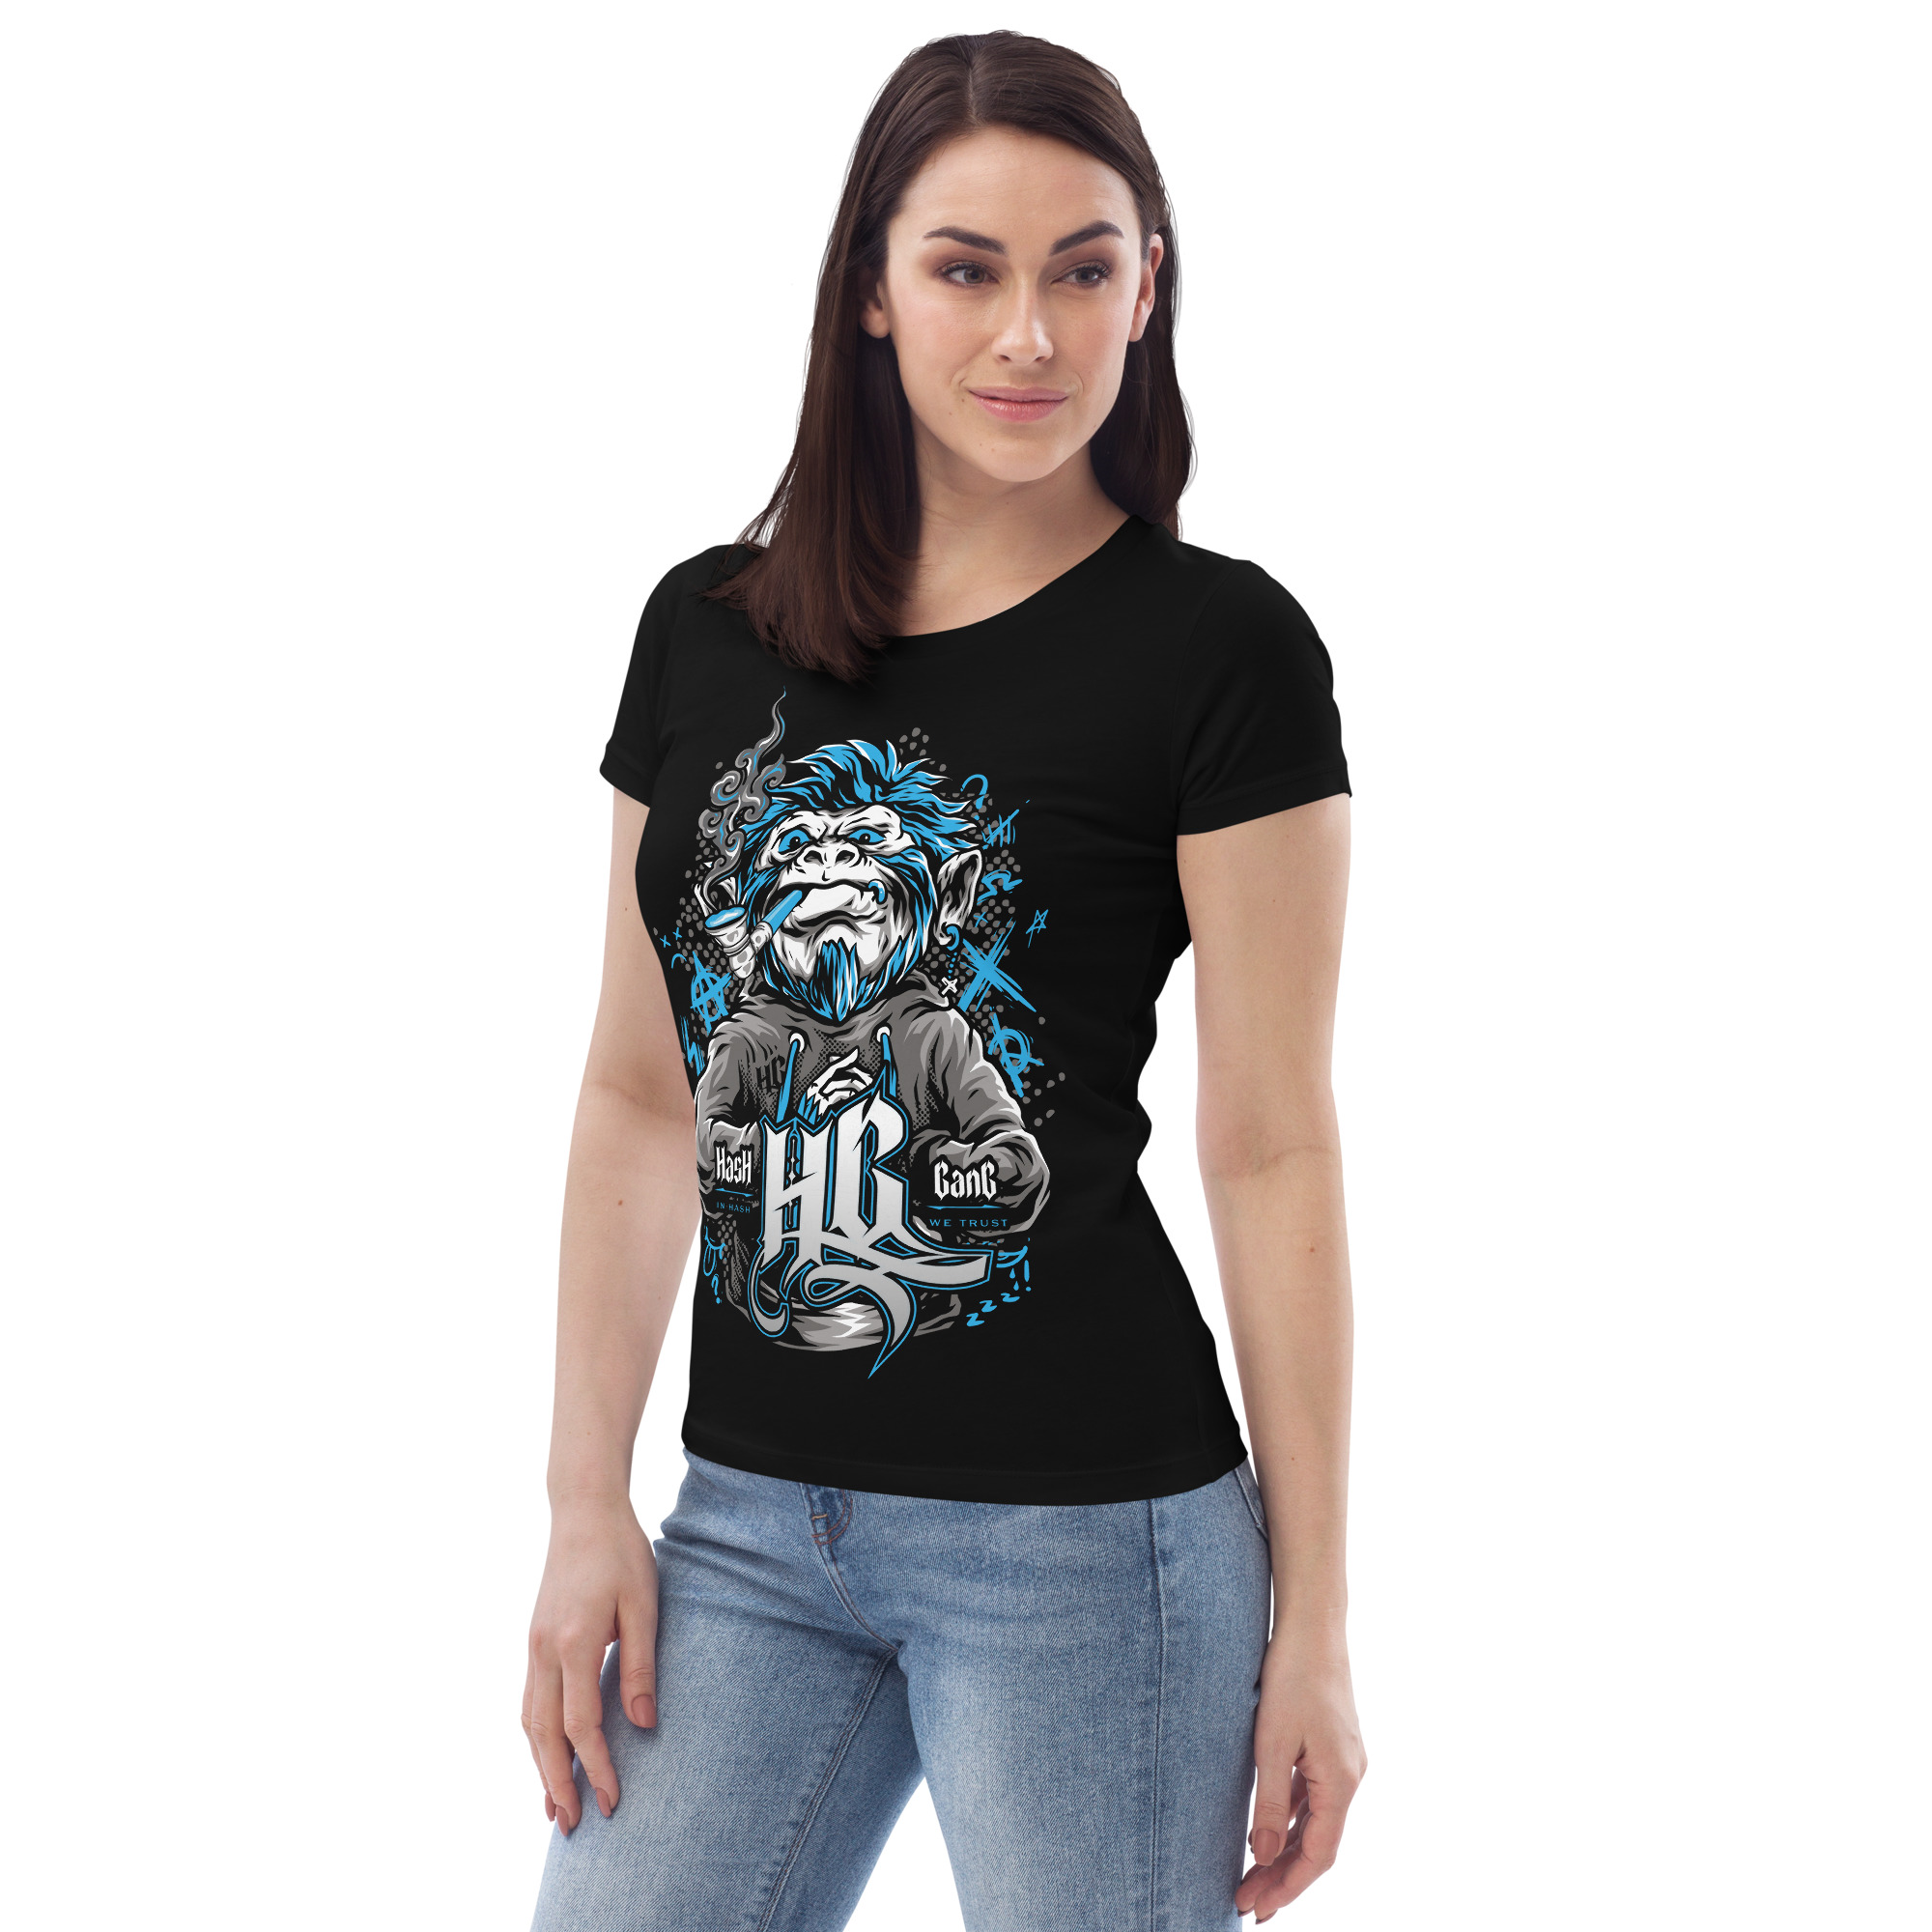 womens-fitted-eco-tee-black-left-front-65a787bea6245.jpg